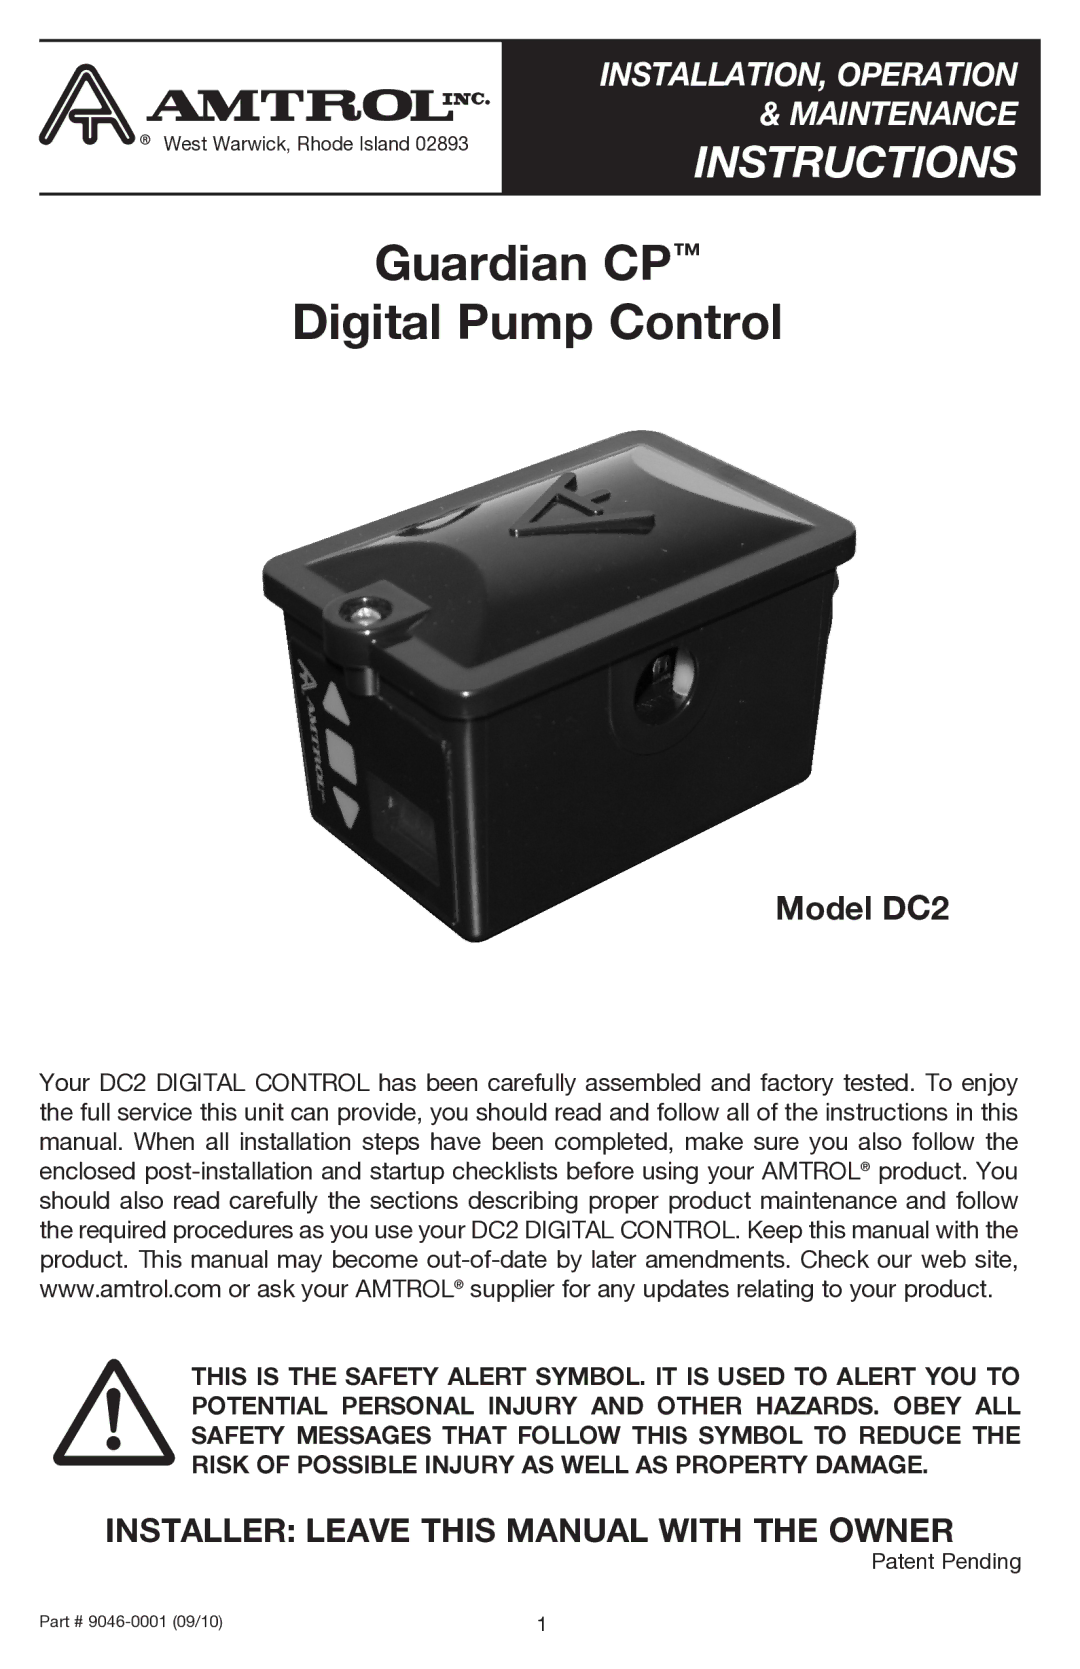 Amtrol manual Model DC2, Installer Leave this Manual with the Owner 